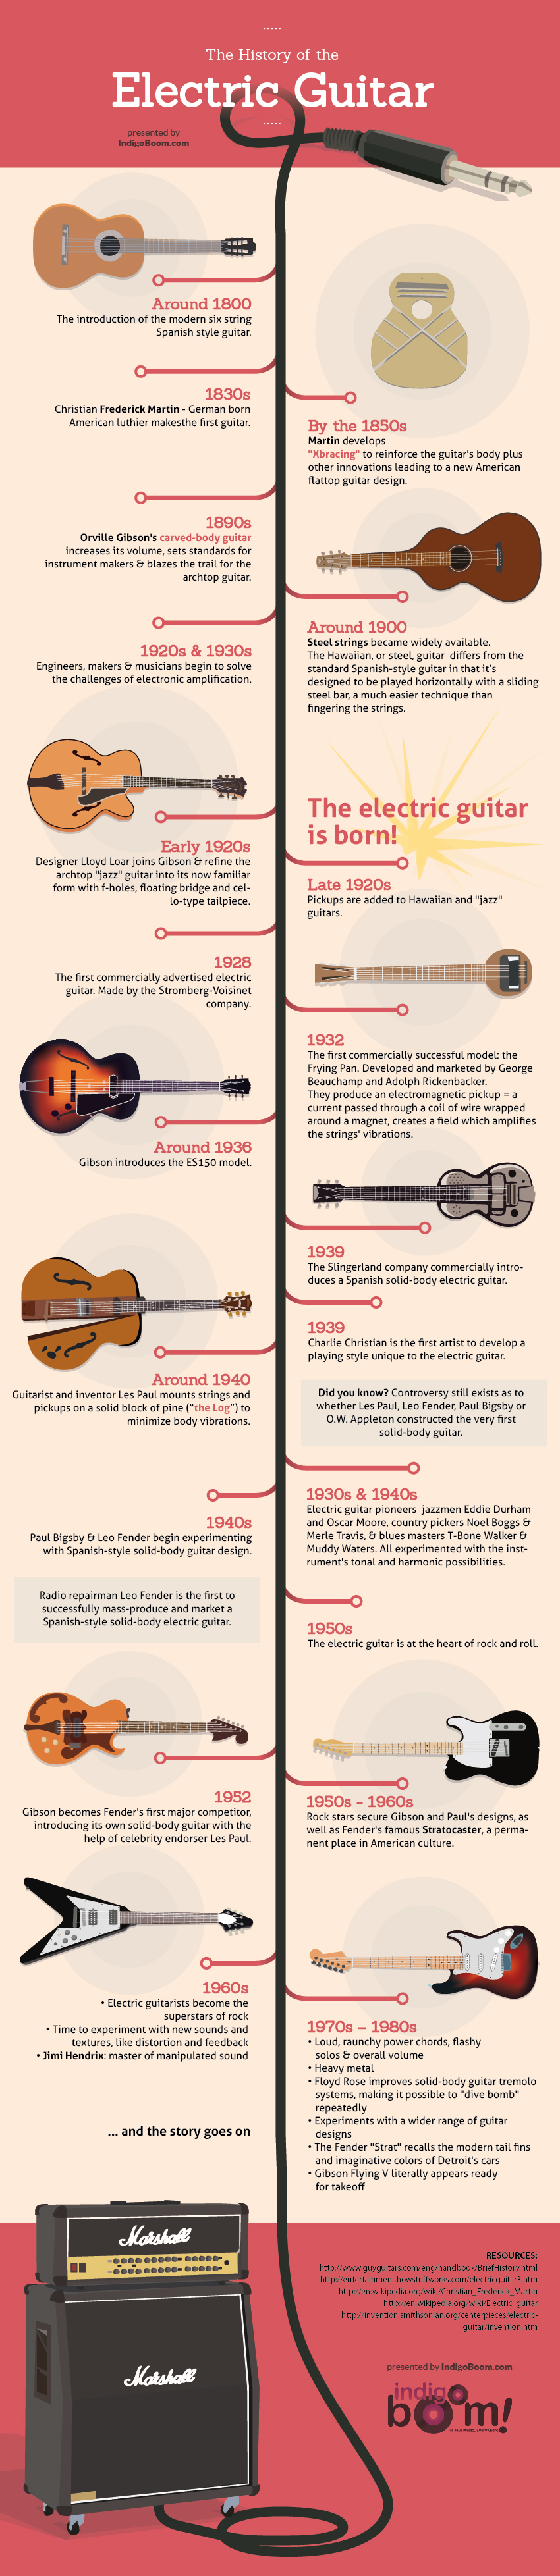 The History of The Electric Guitar | Visual.ly